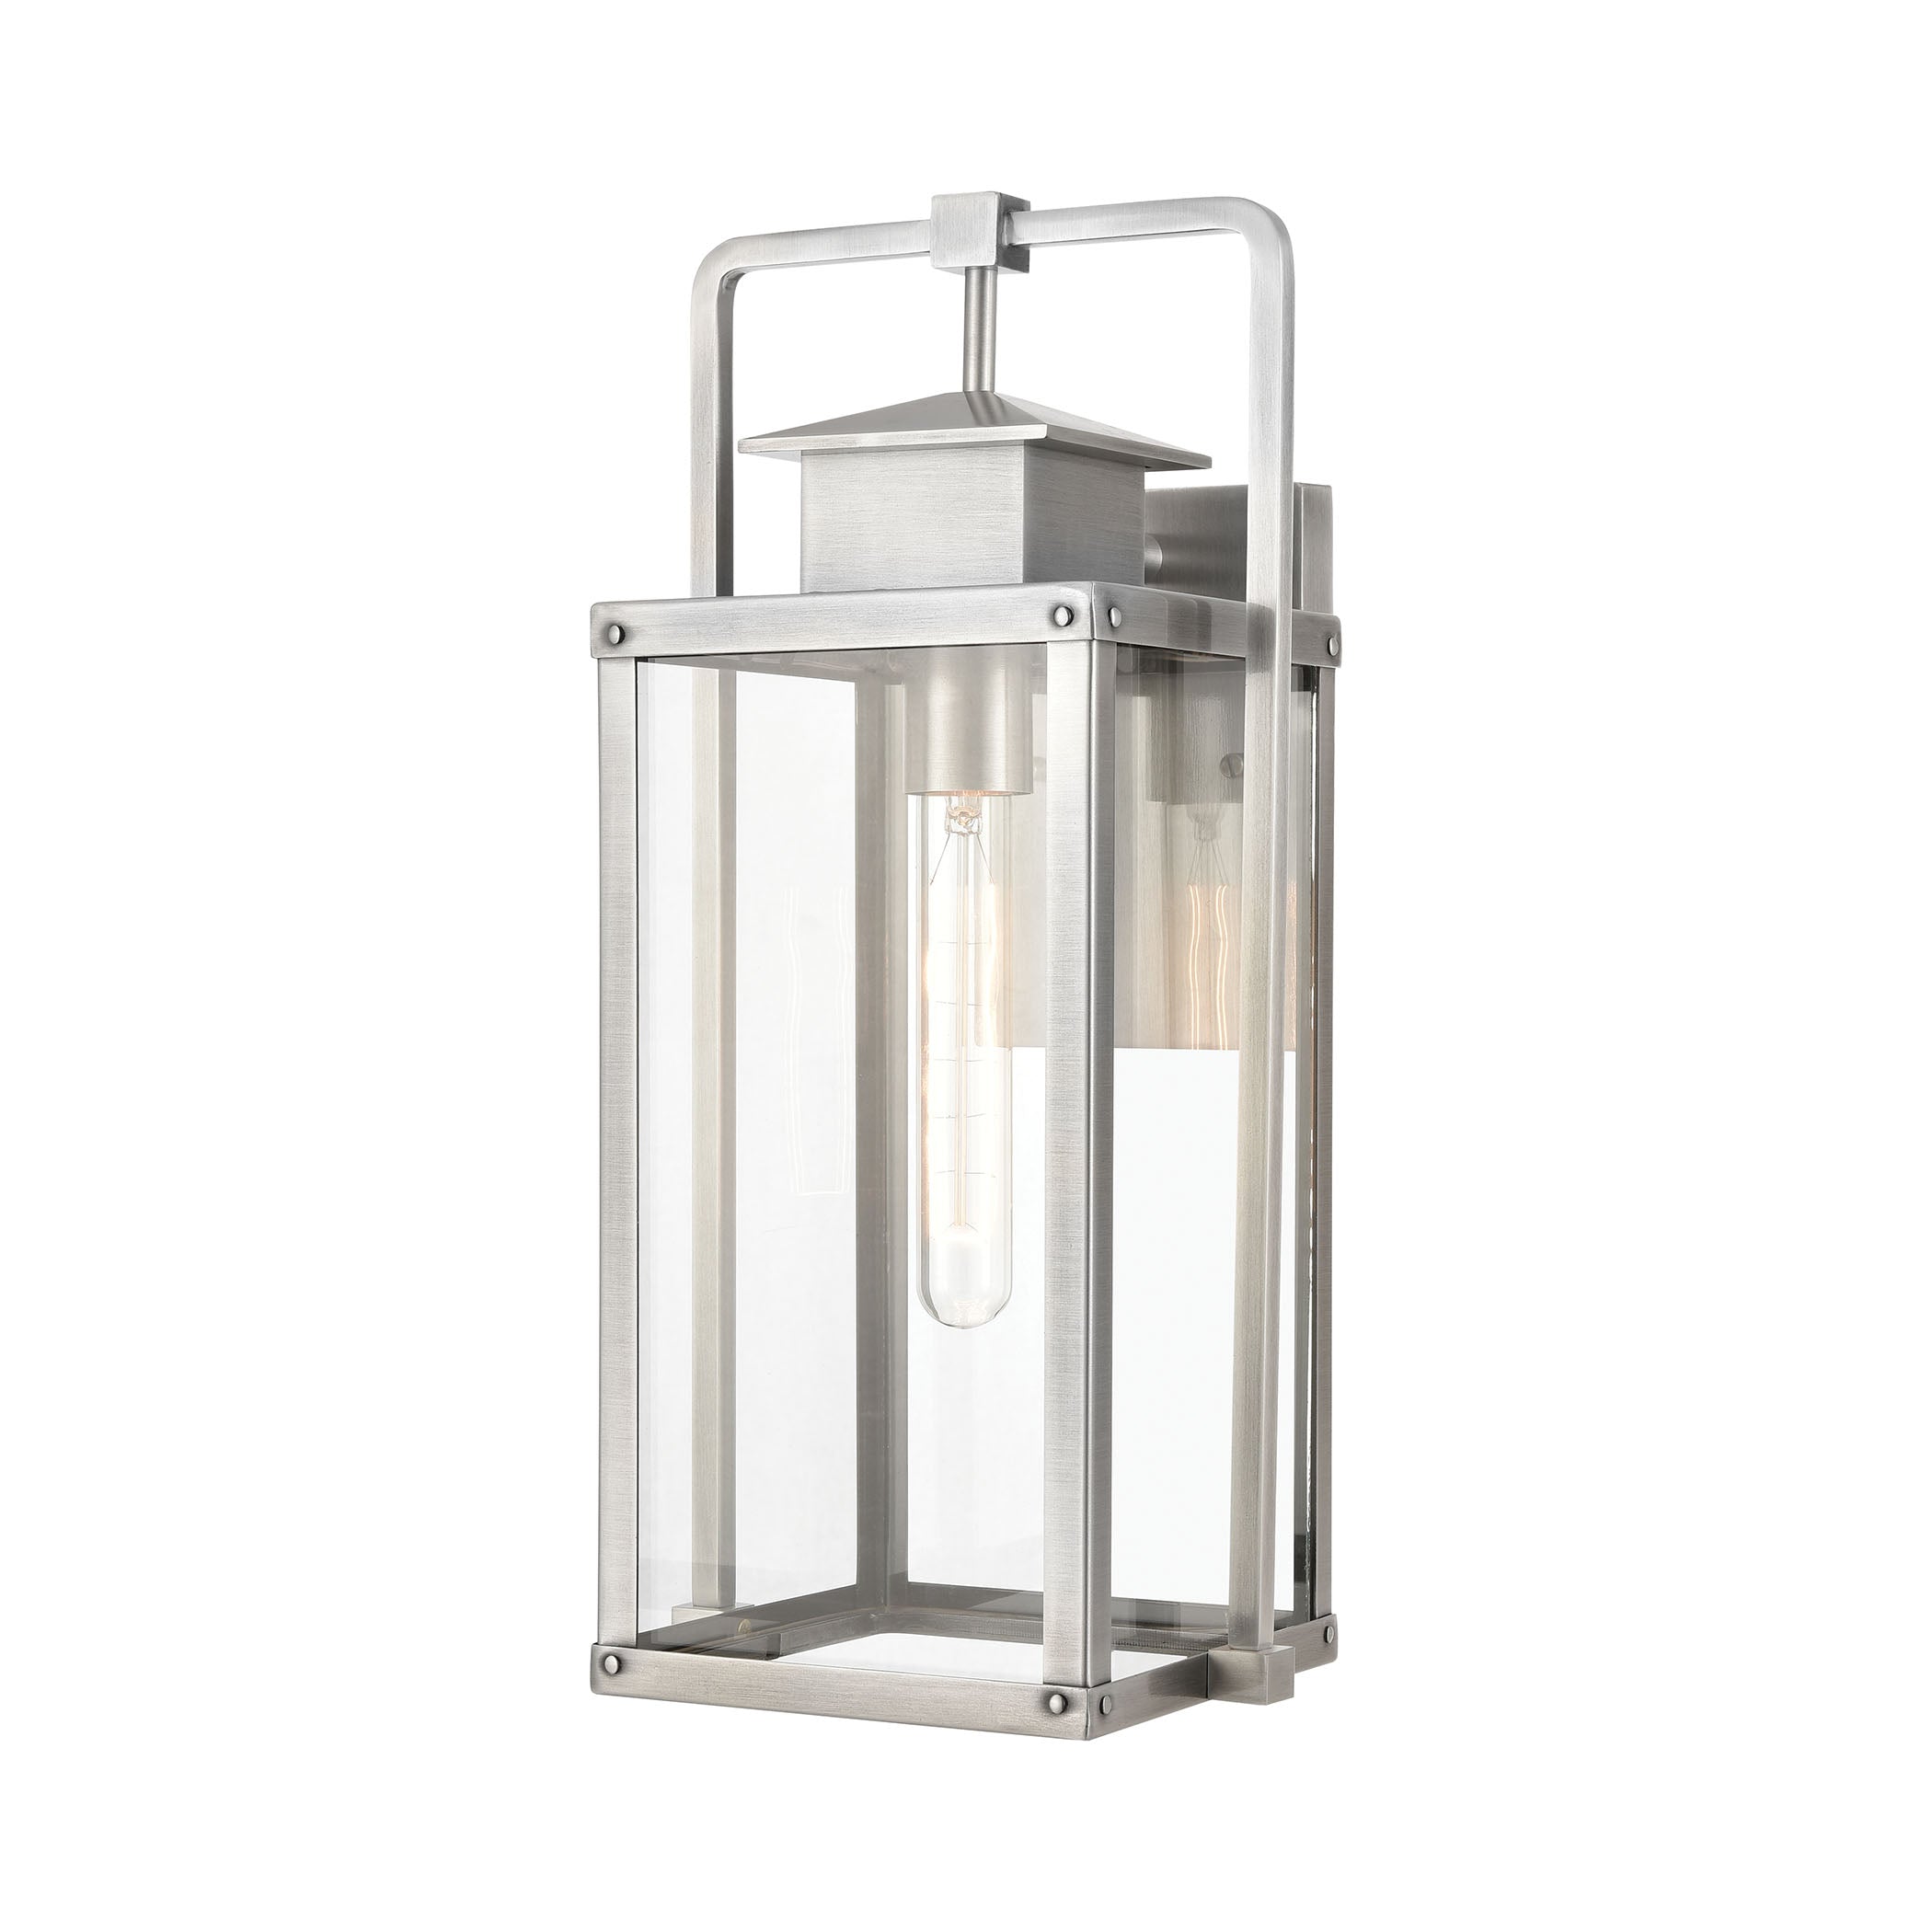 ELK Lighting 89172/1 Crested Butte 1-Light Outdoor Sconce in Antique Brushed Aluminum with Clear Glass Enclosure